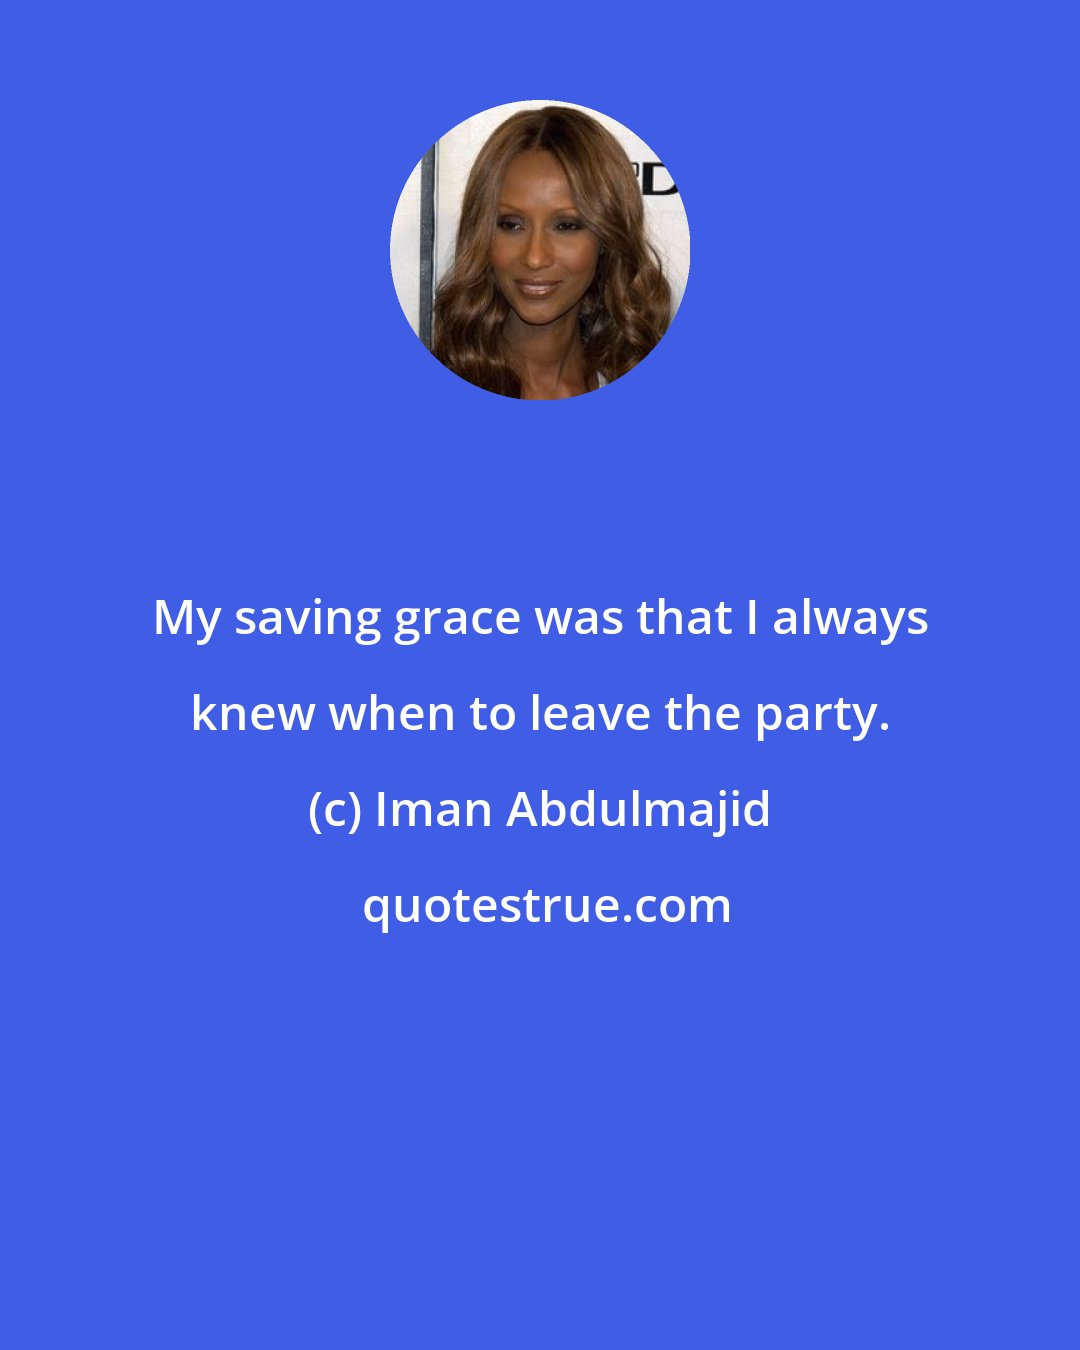 Iman Abdulmajid: My saving grace was that I always knew when to leave the party.